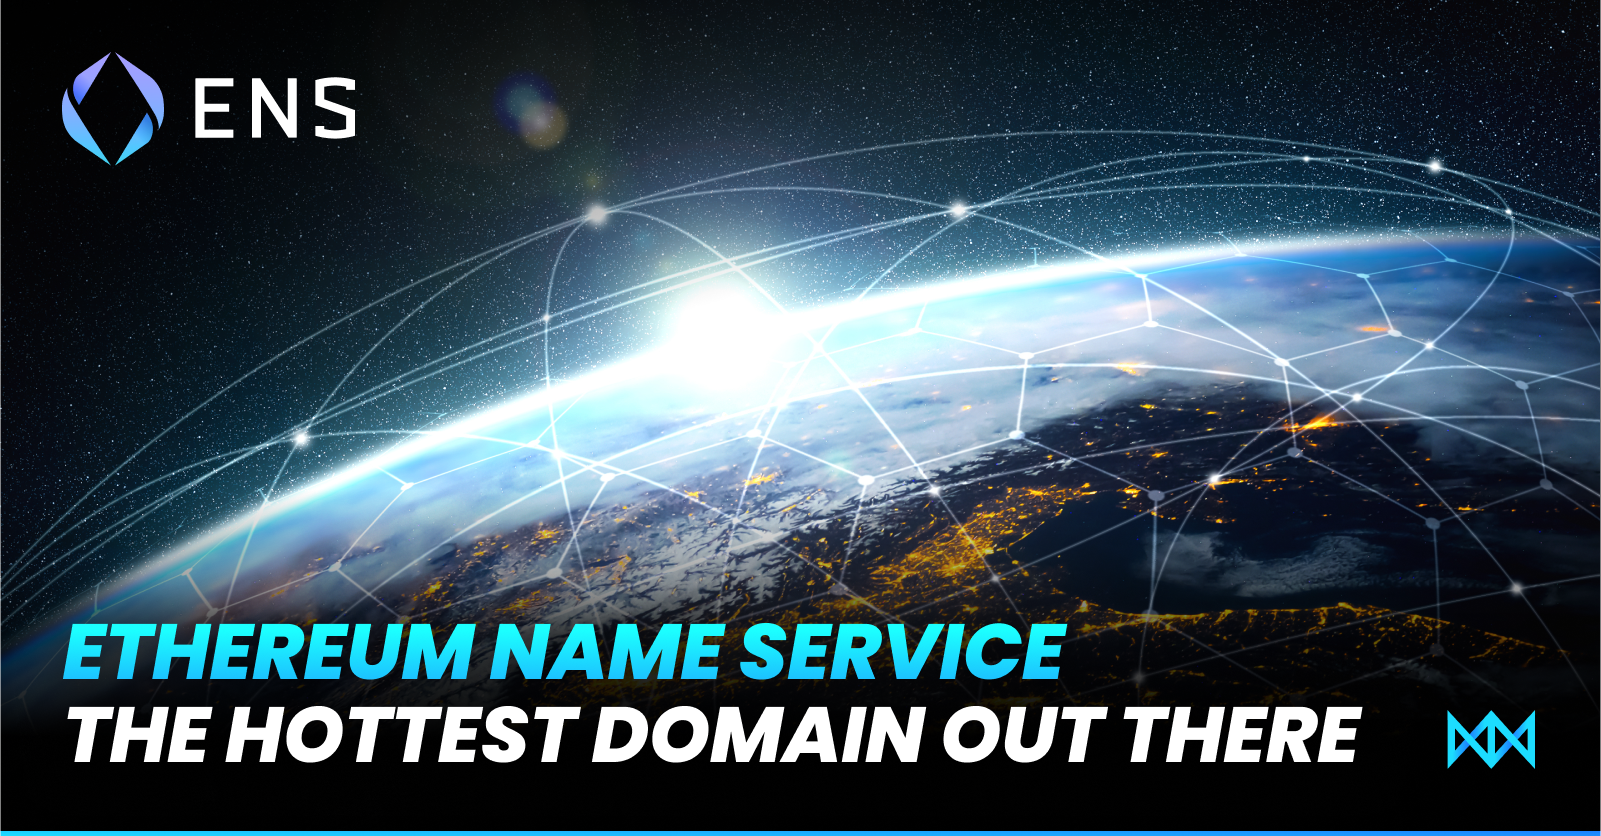 How to get an ENS Domain?